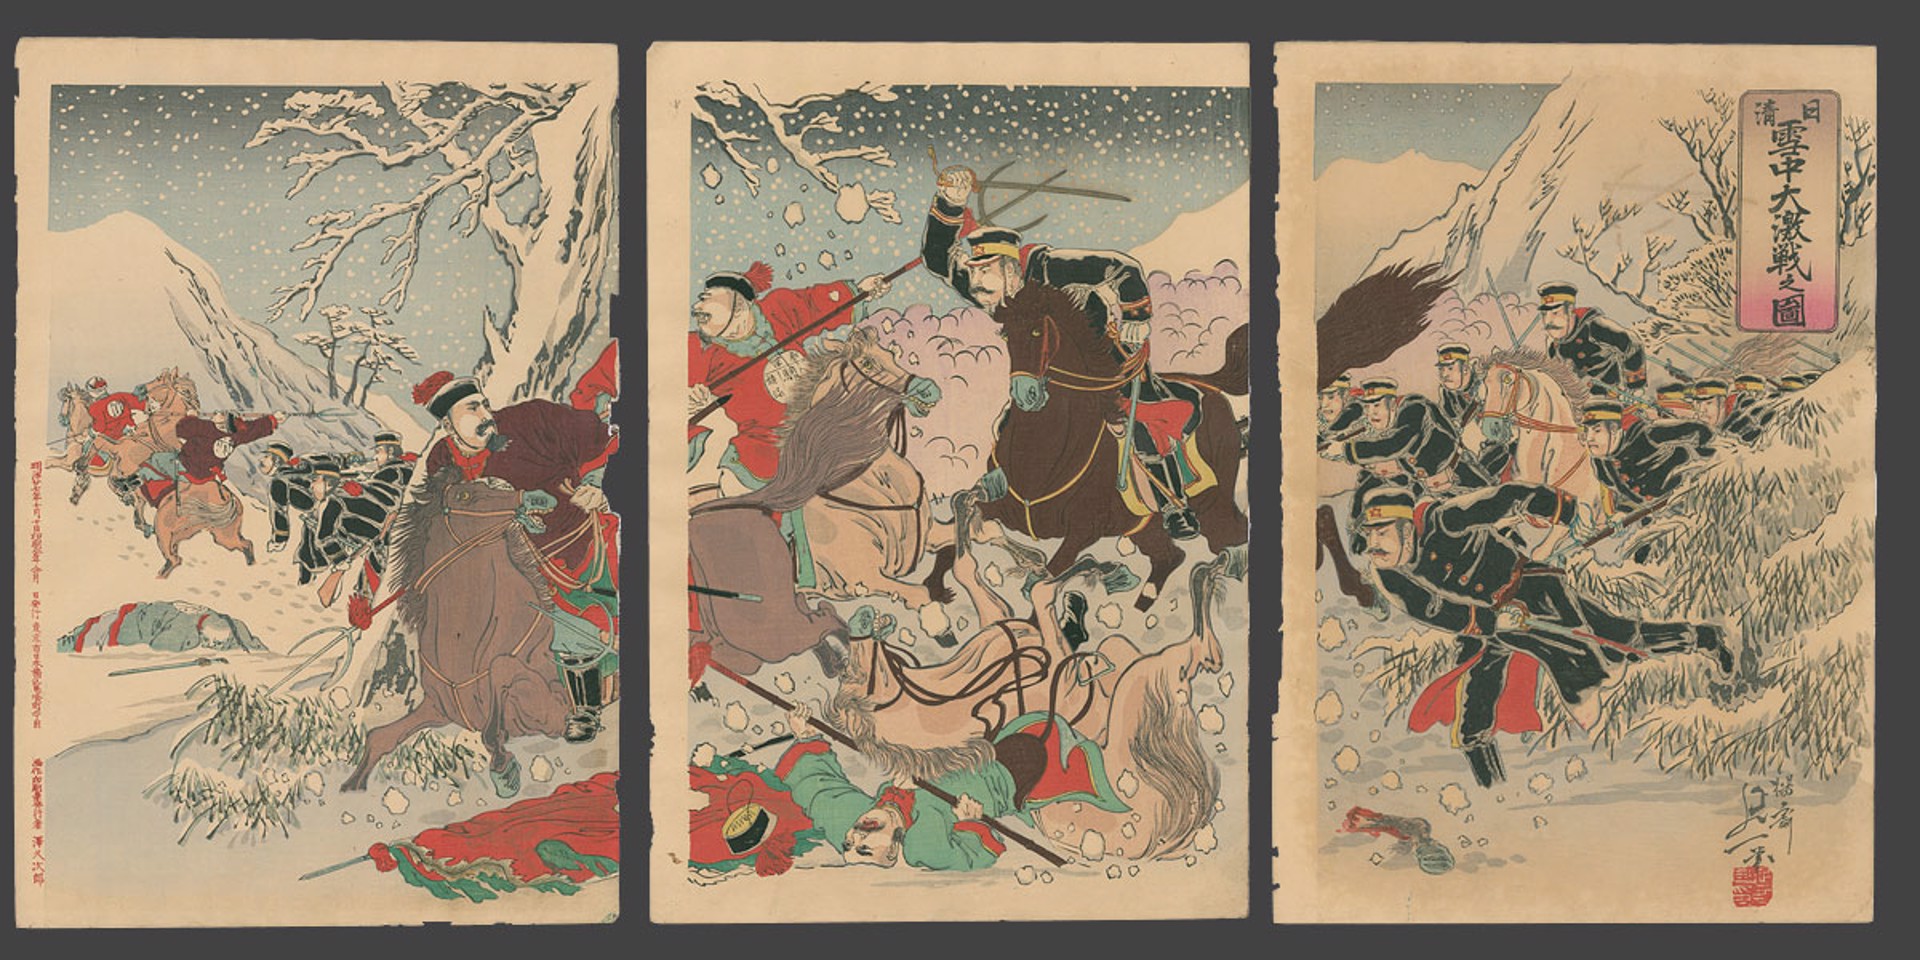 Furious Fight During a Great Snowstorm Sino - Japanese war by Nobukazu